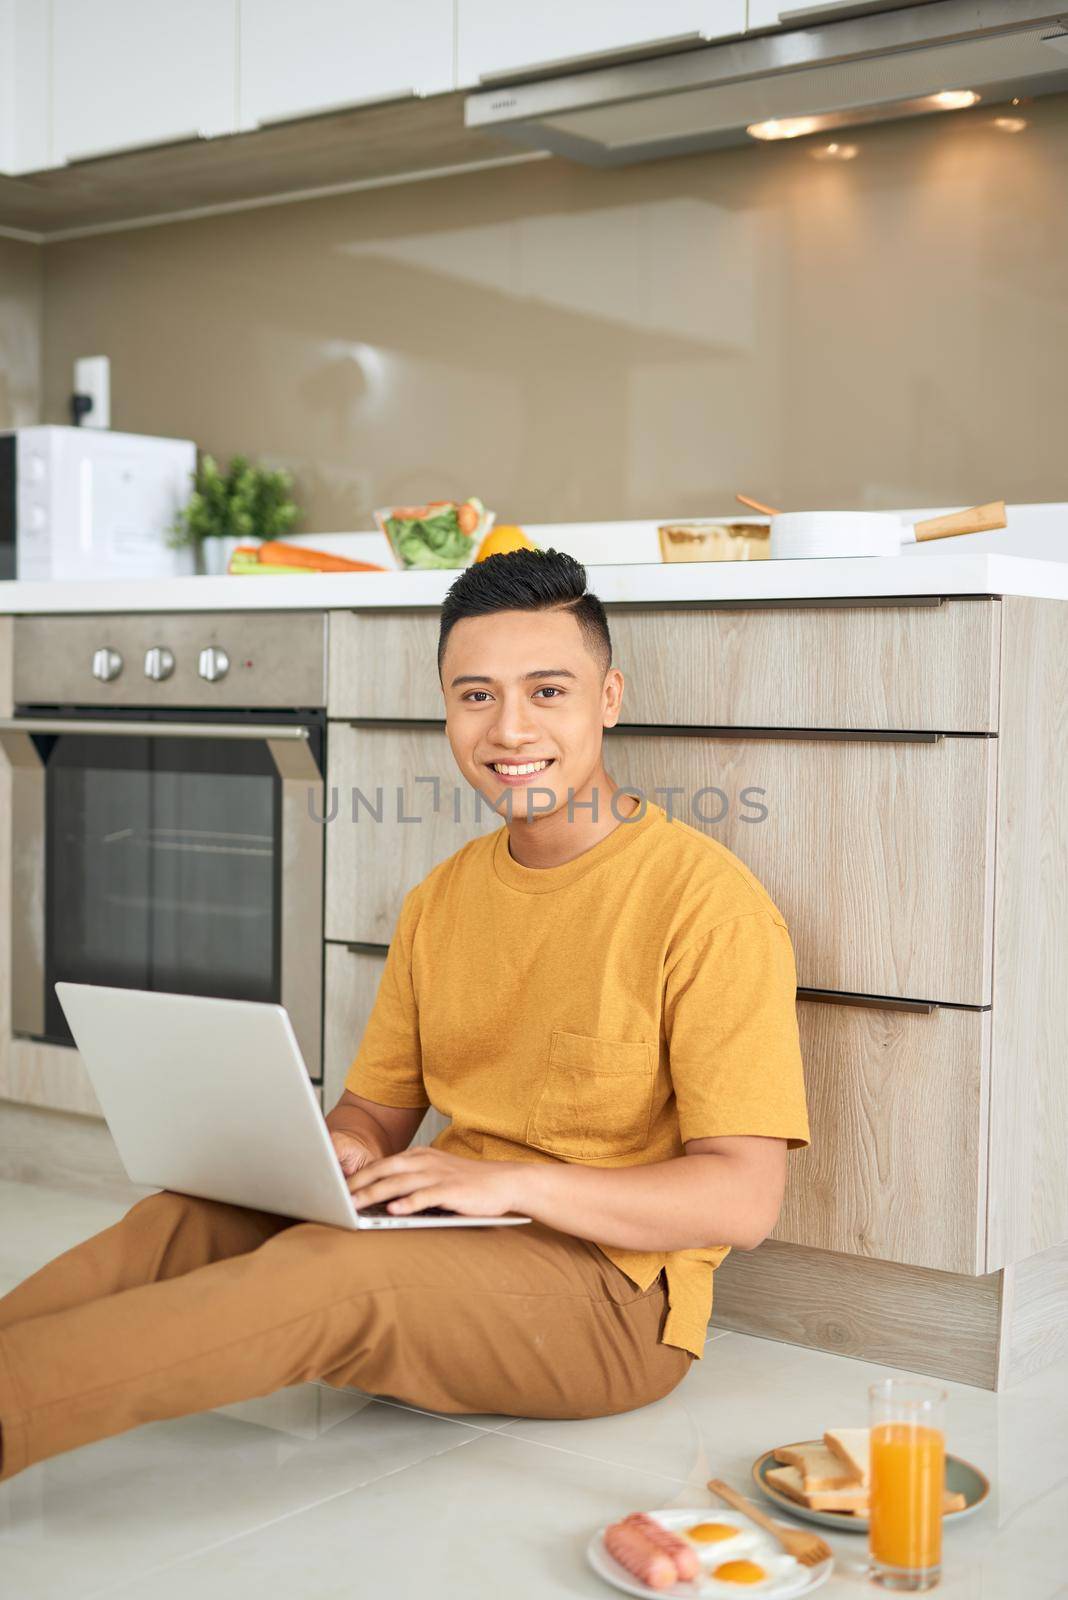 Young business man is smiling, eating breakfast and working on laptop in bright kitchen.